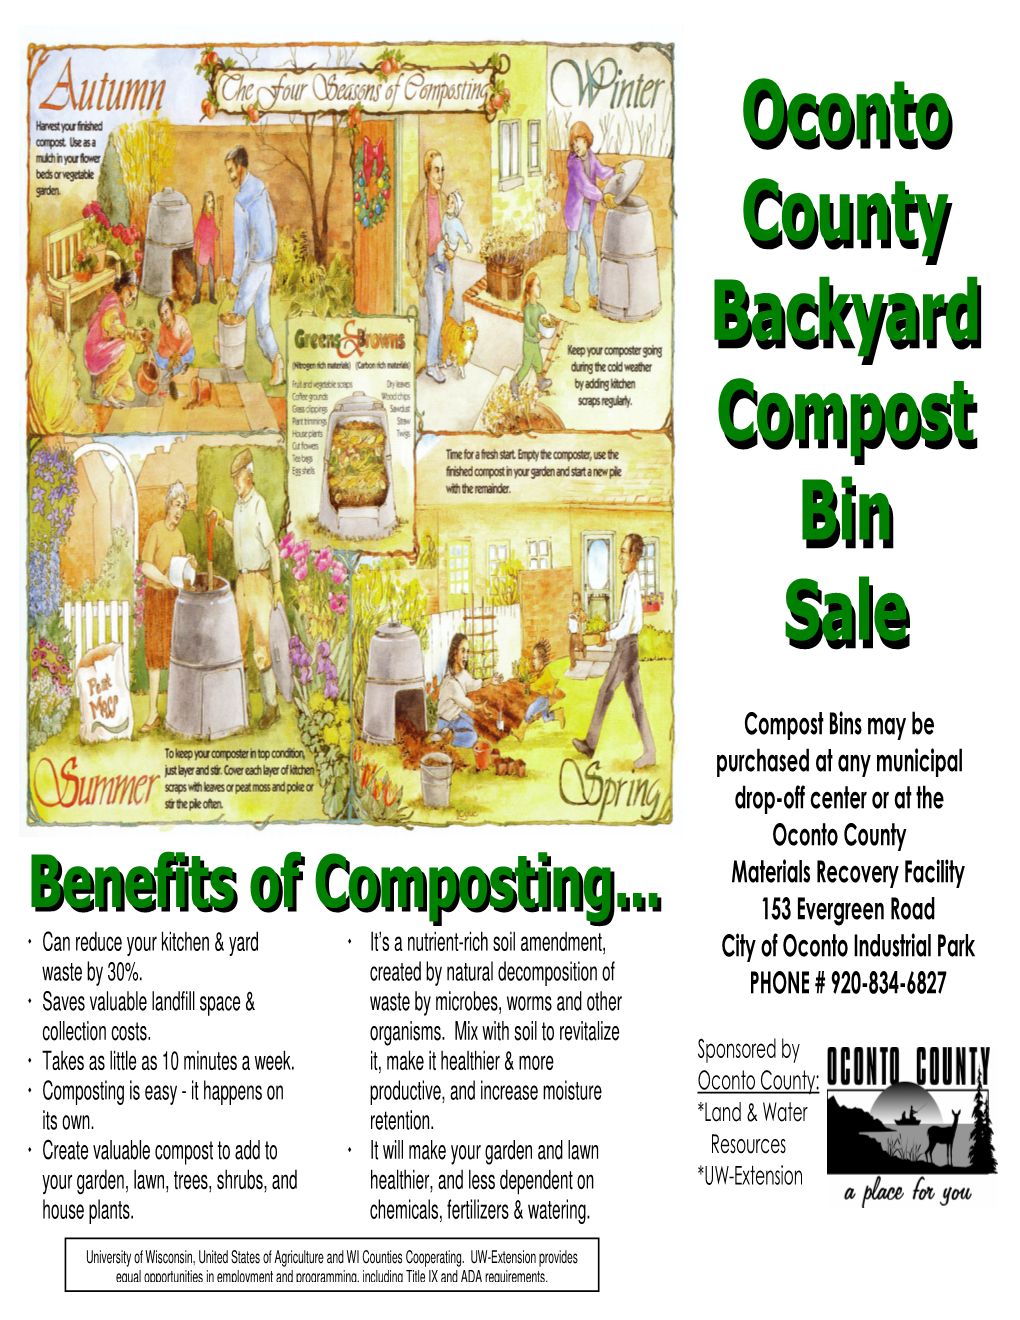 Compost Bins May Be Purchased at Any Municipal Drop-Off Center Or at the Oconto County